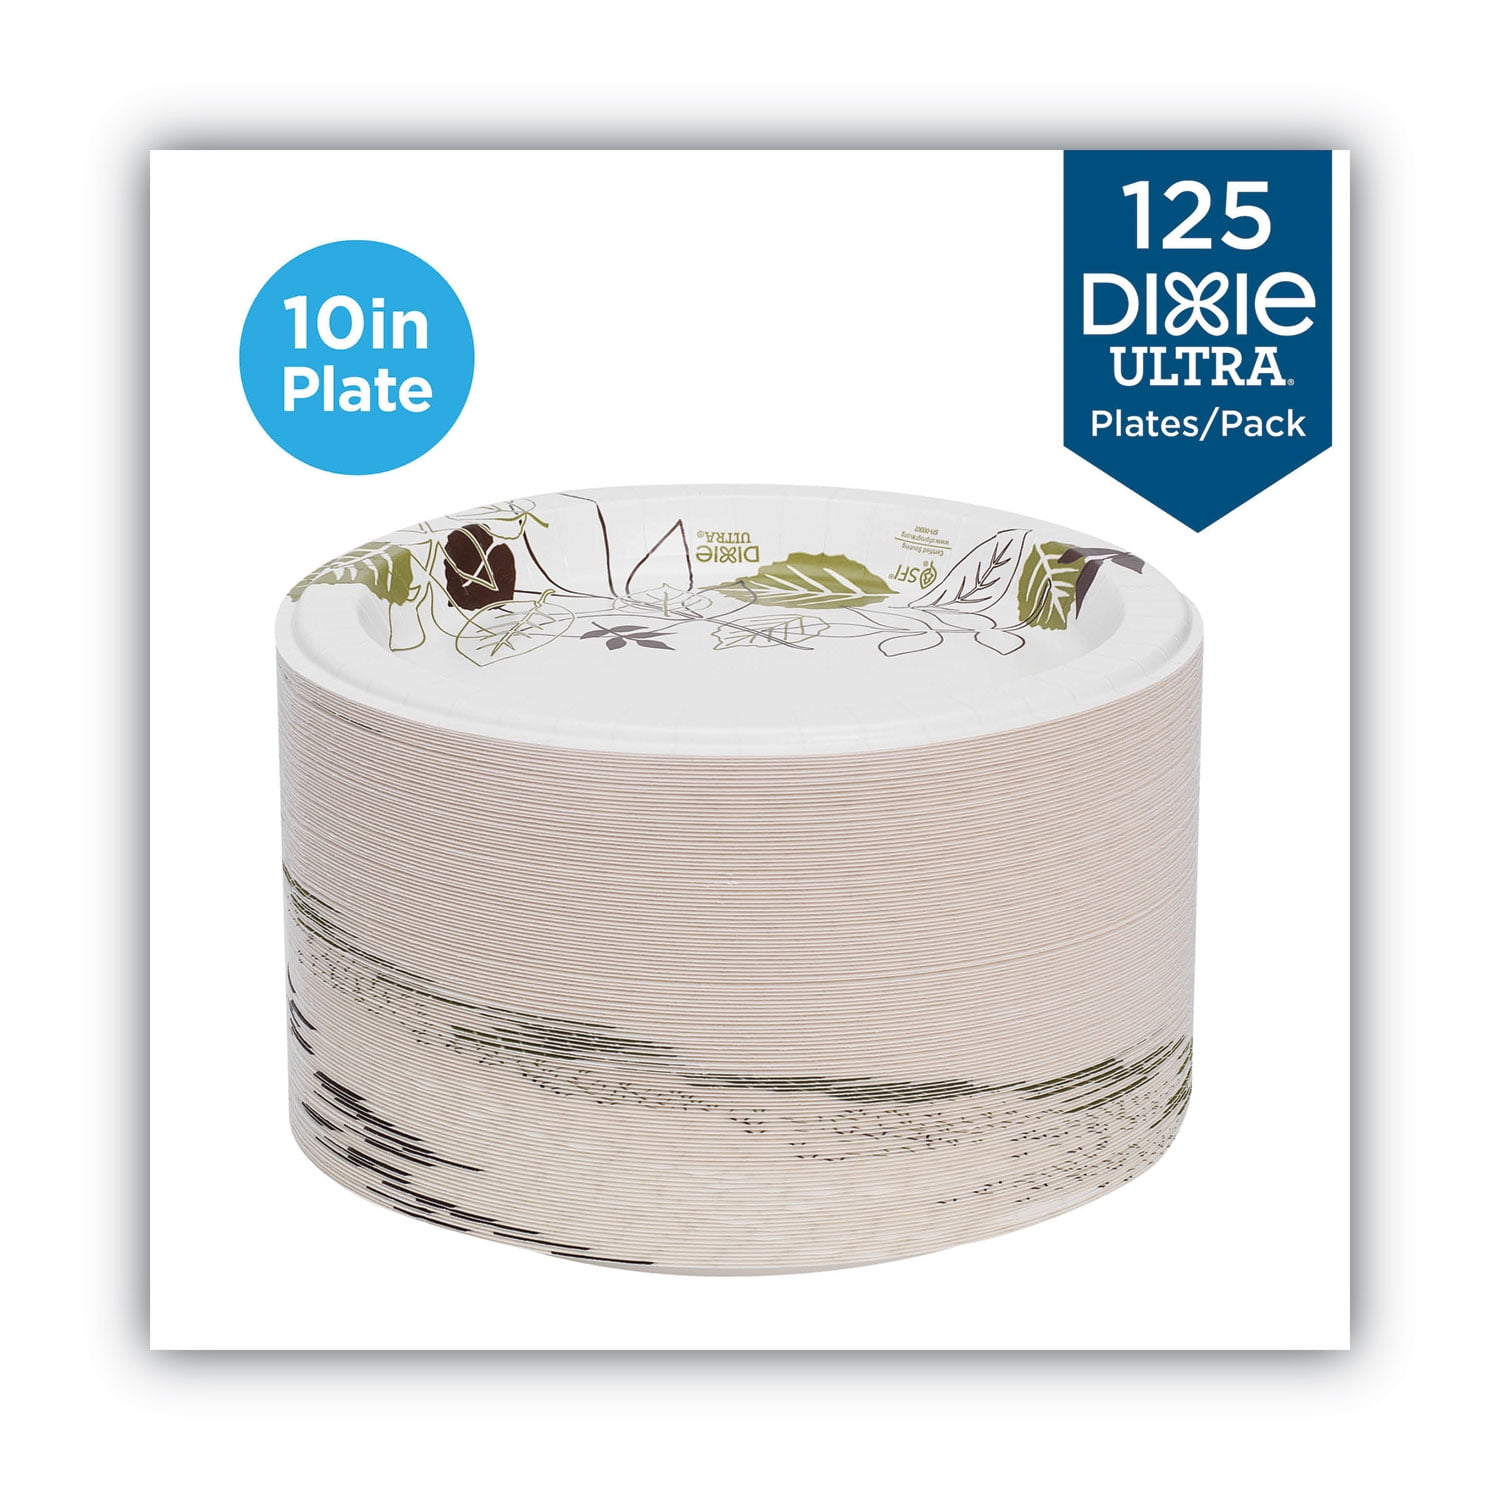 Stock Your Home Uncoated 9 Paper Plates - 300 Count